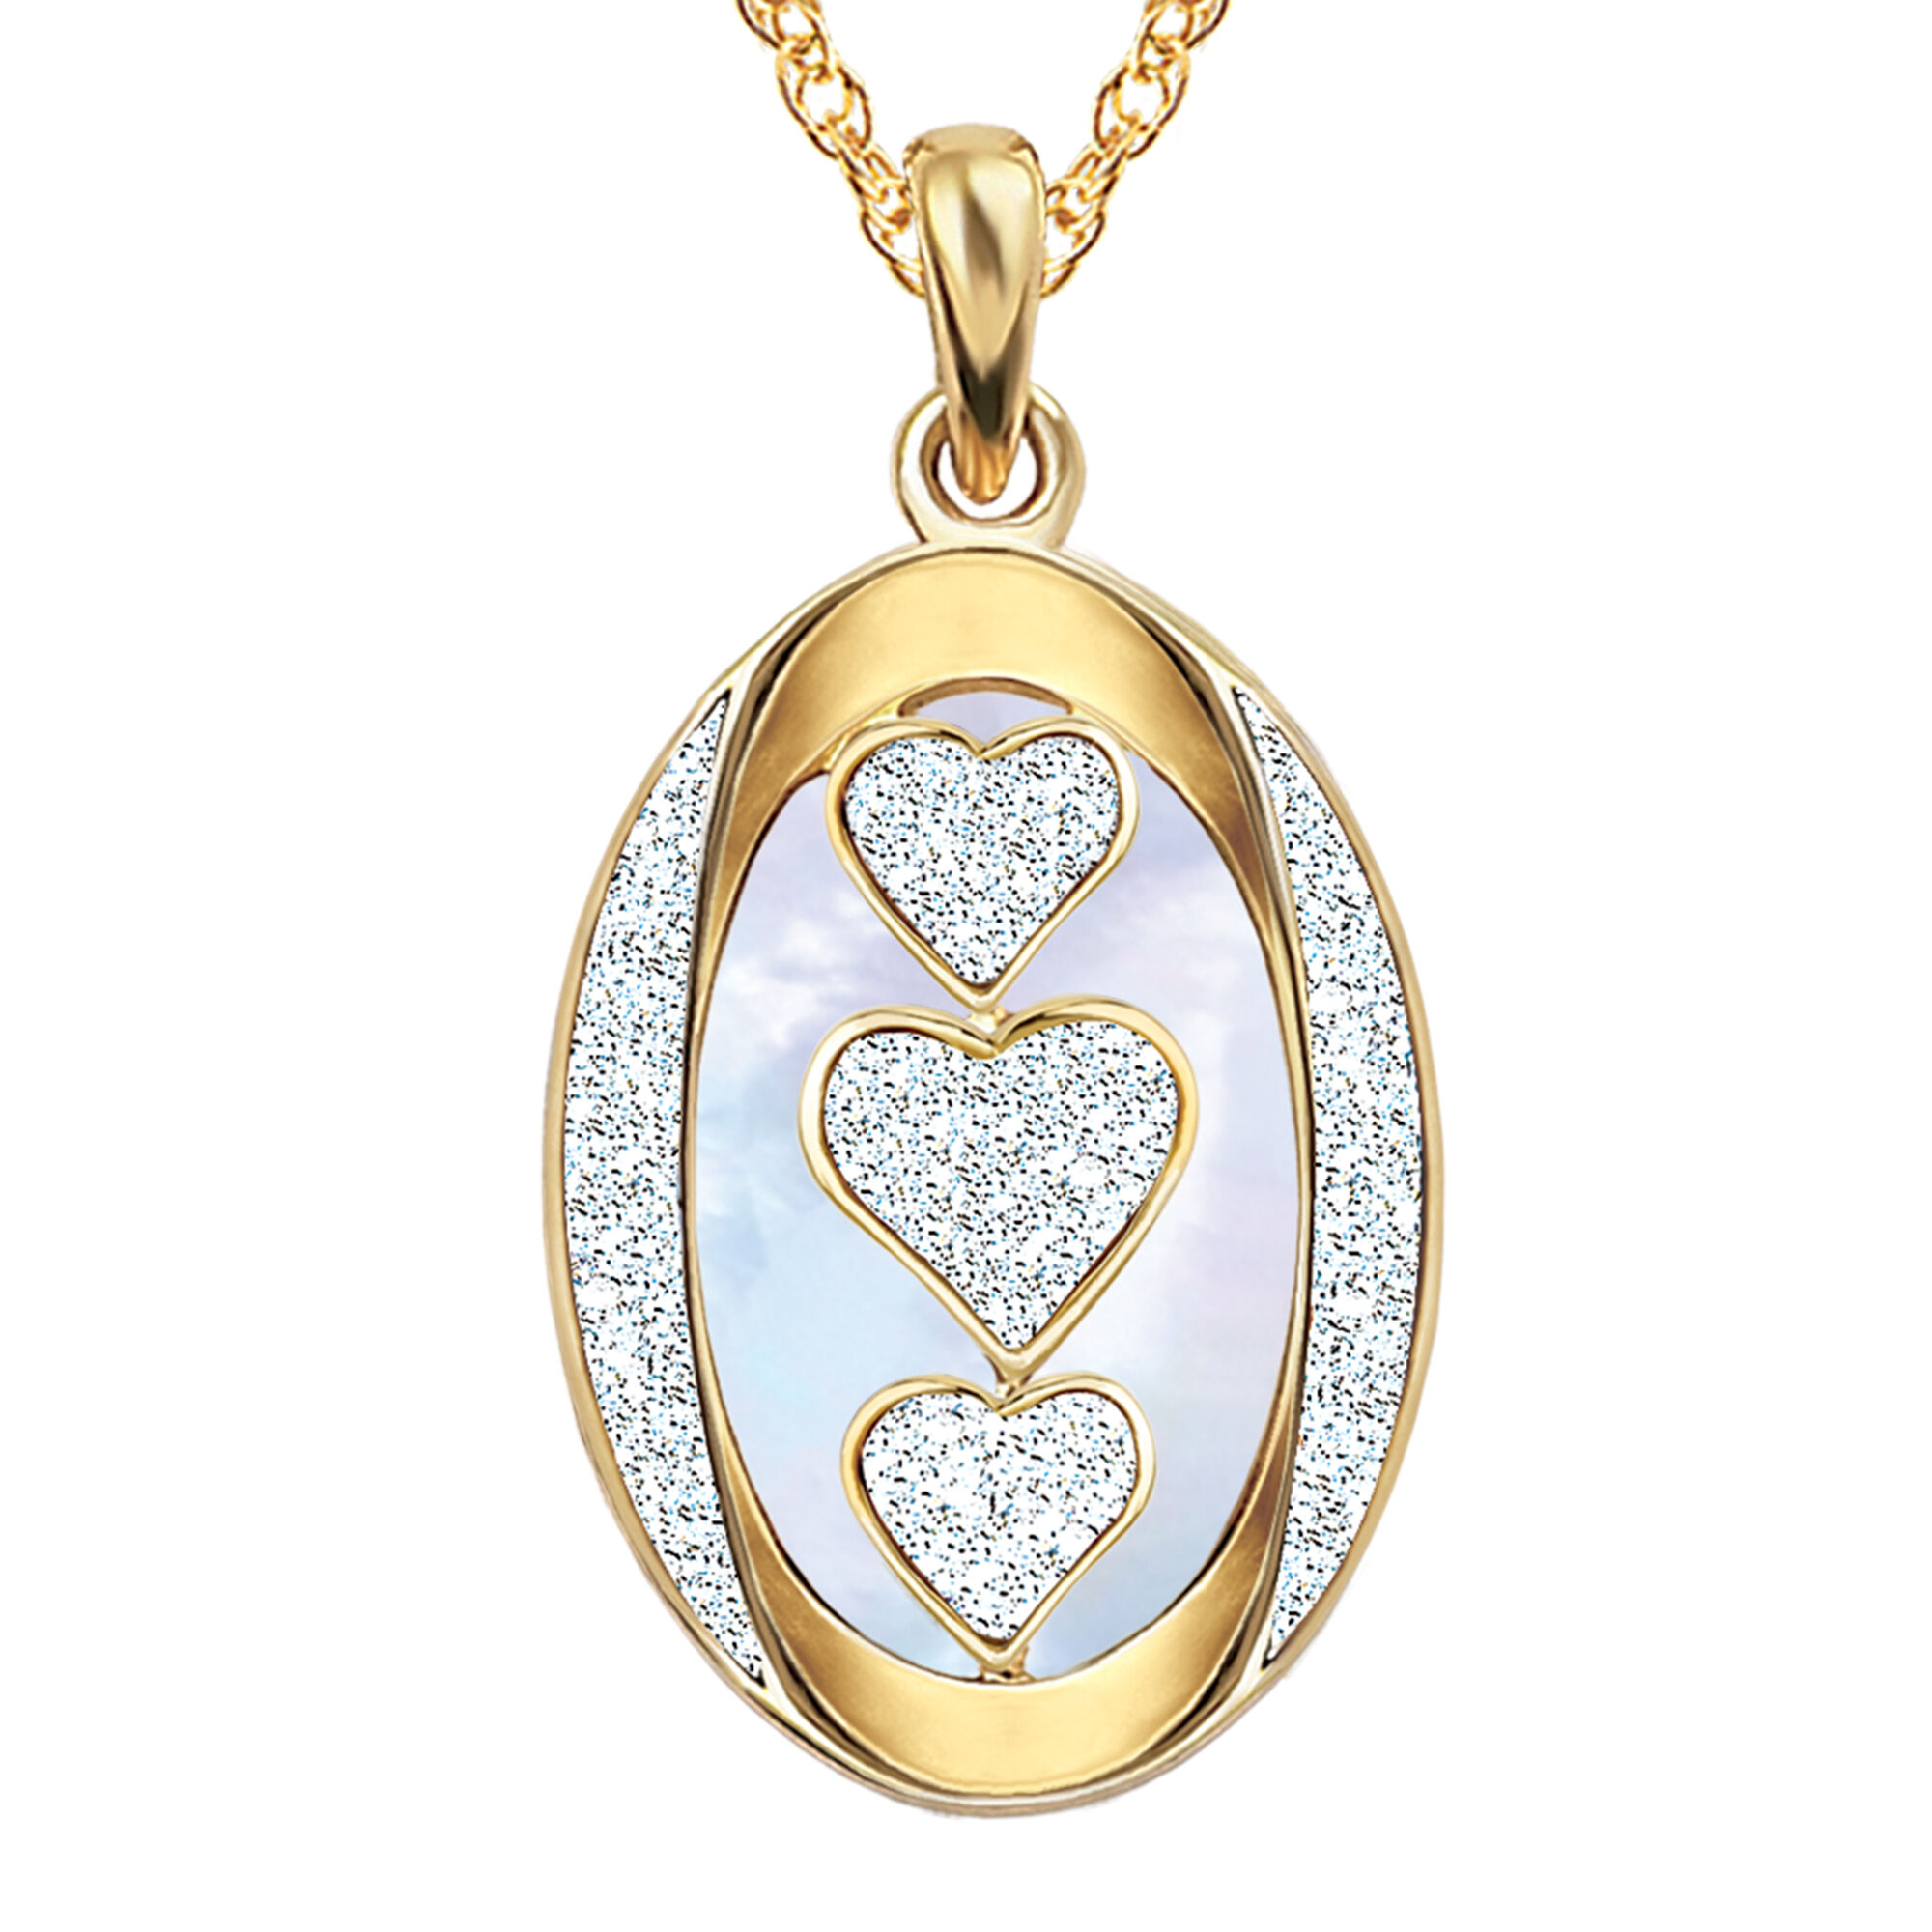 I Love You Personalized Diamond Pendant with FREE Matching Earrings 5238 0268 c front